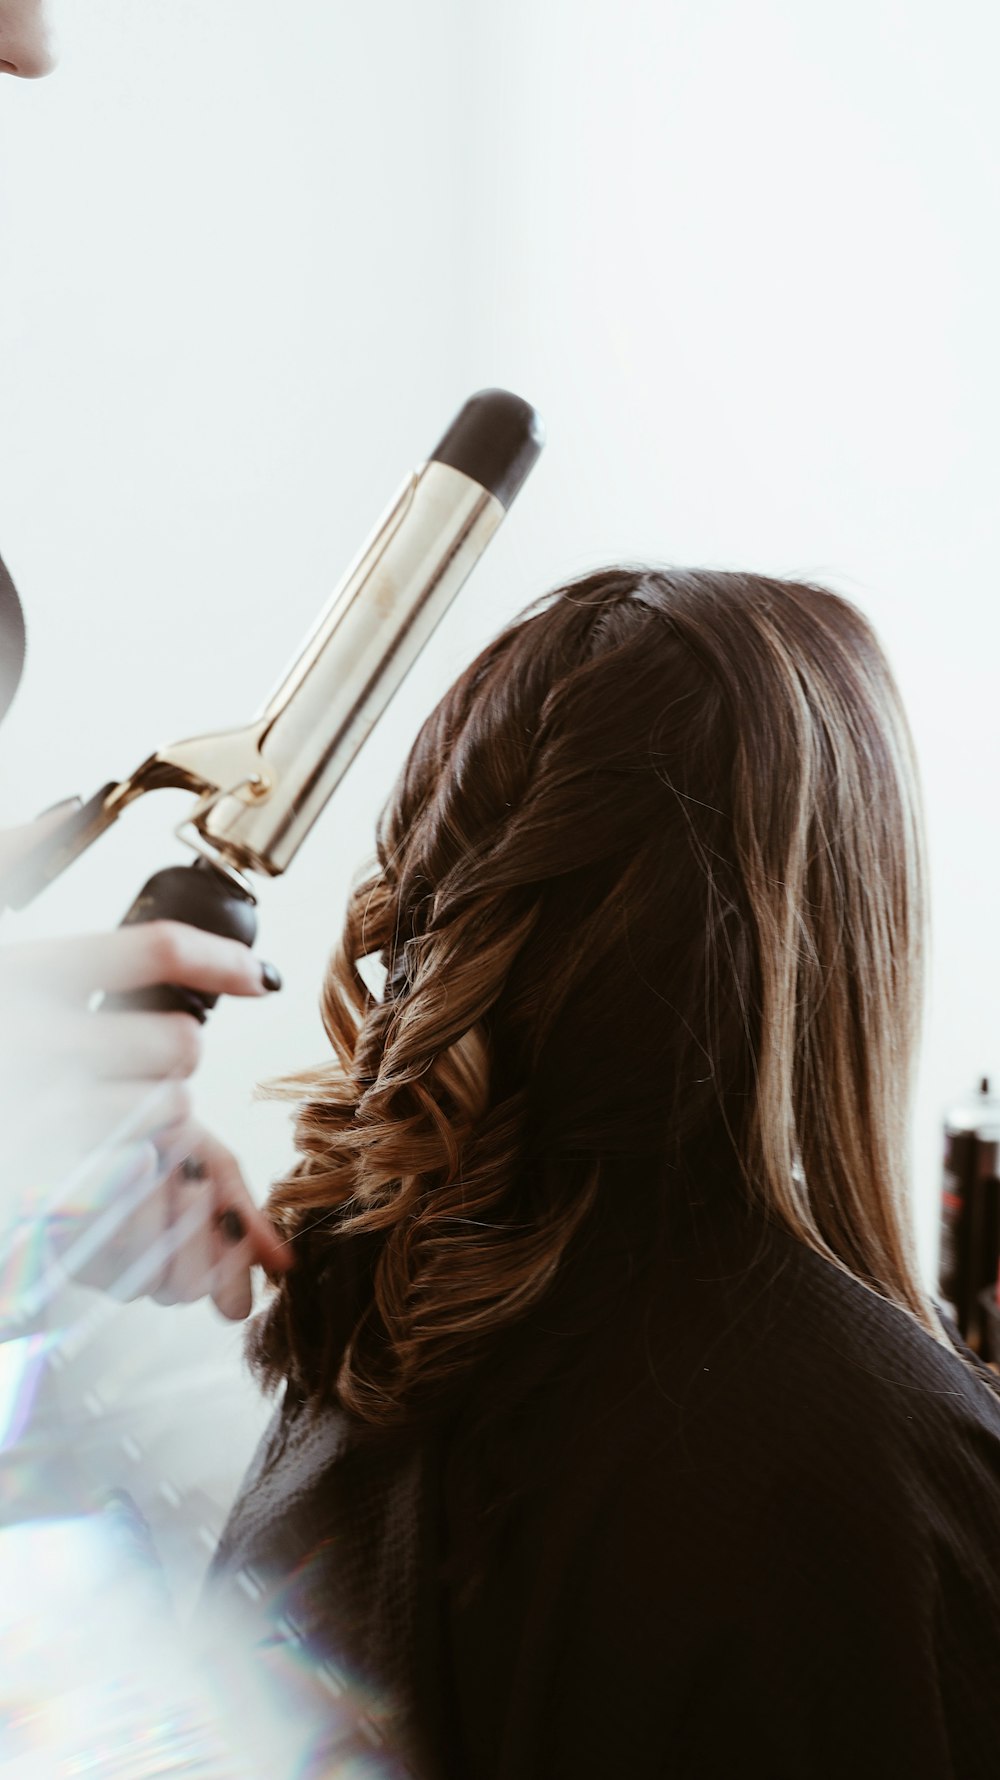 person holding gray hair curler